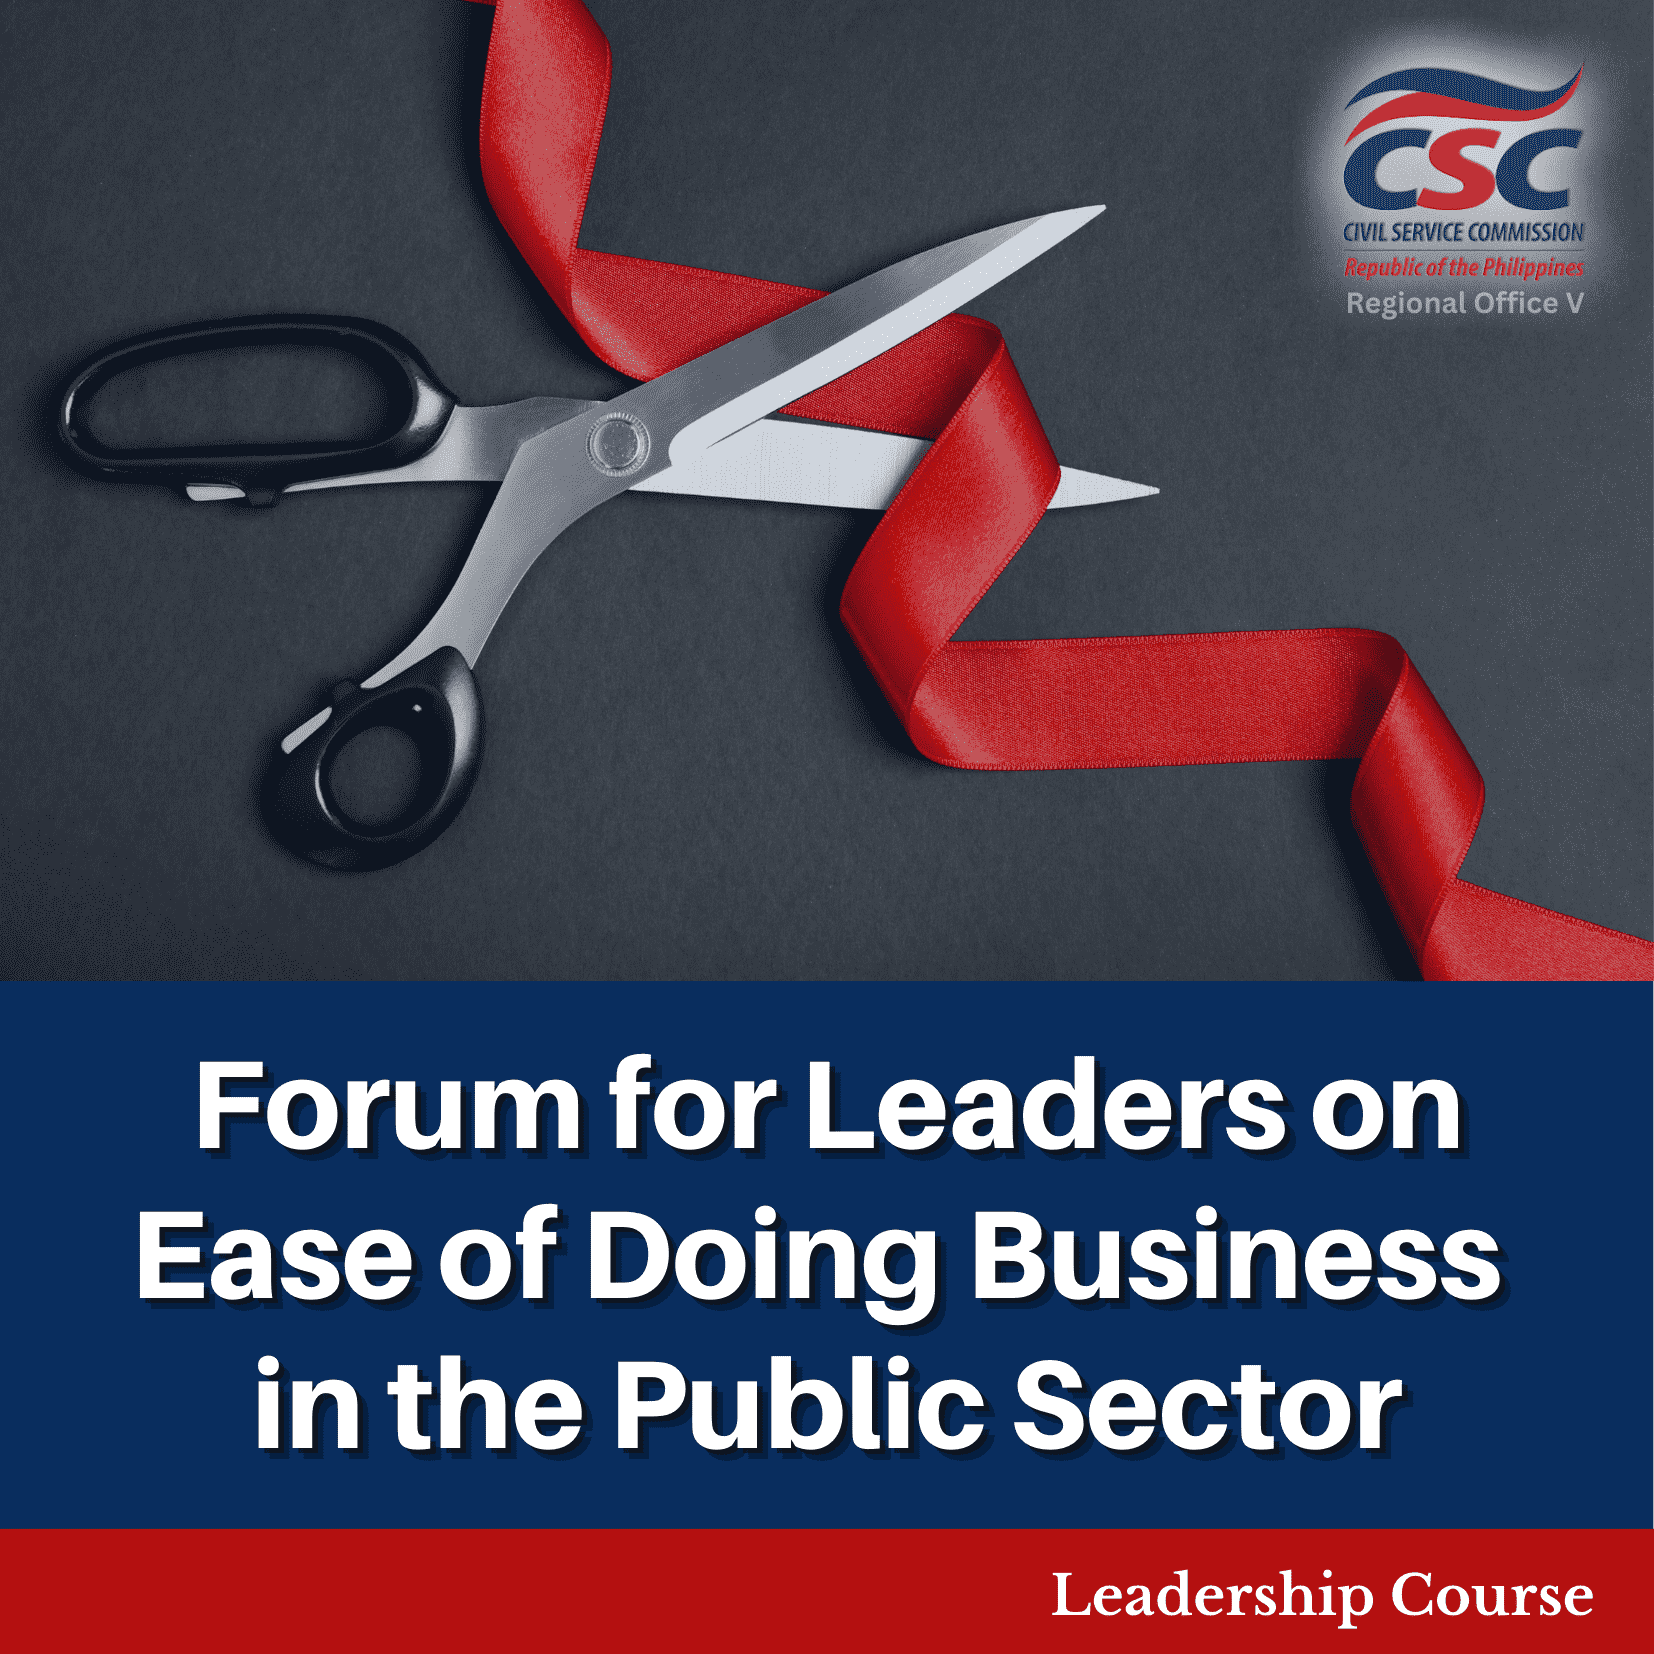 Forum for Leaders on Ease of Doing Business in the Public Sector